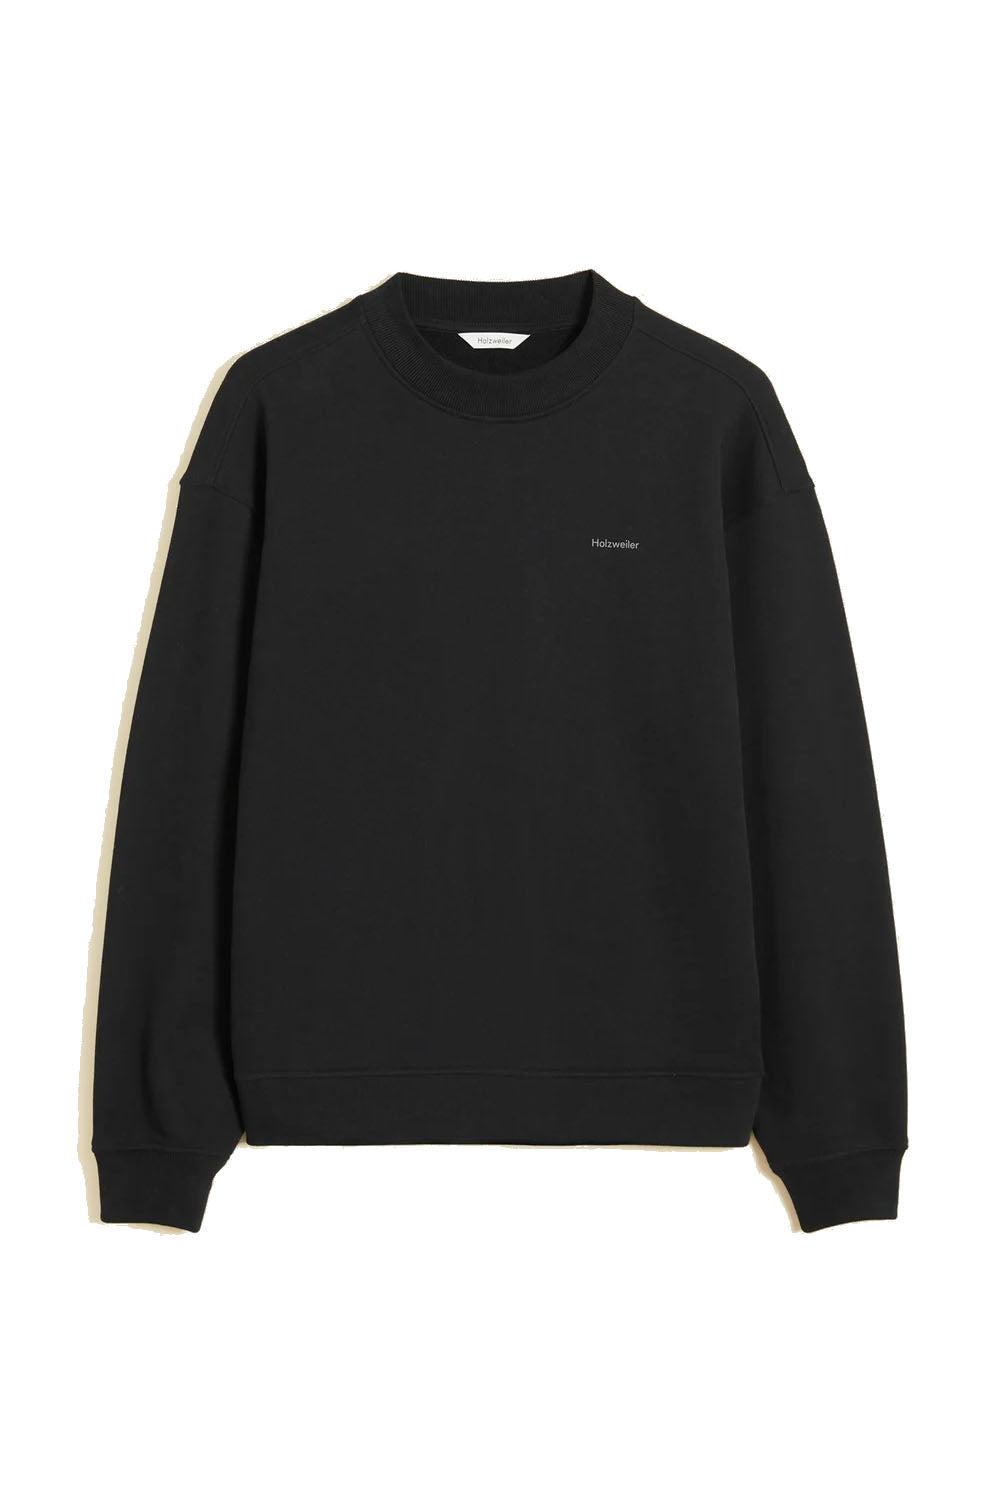 W. Relaxed Crew Black